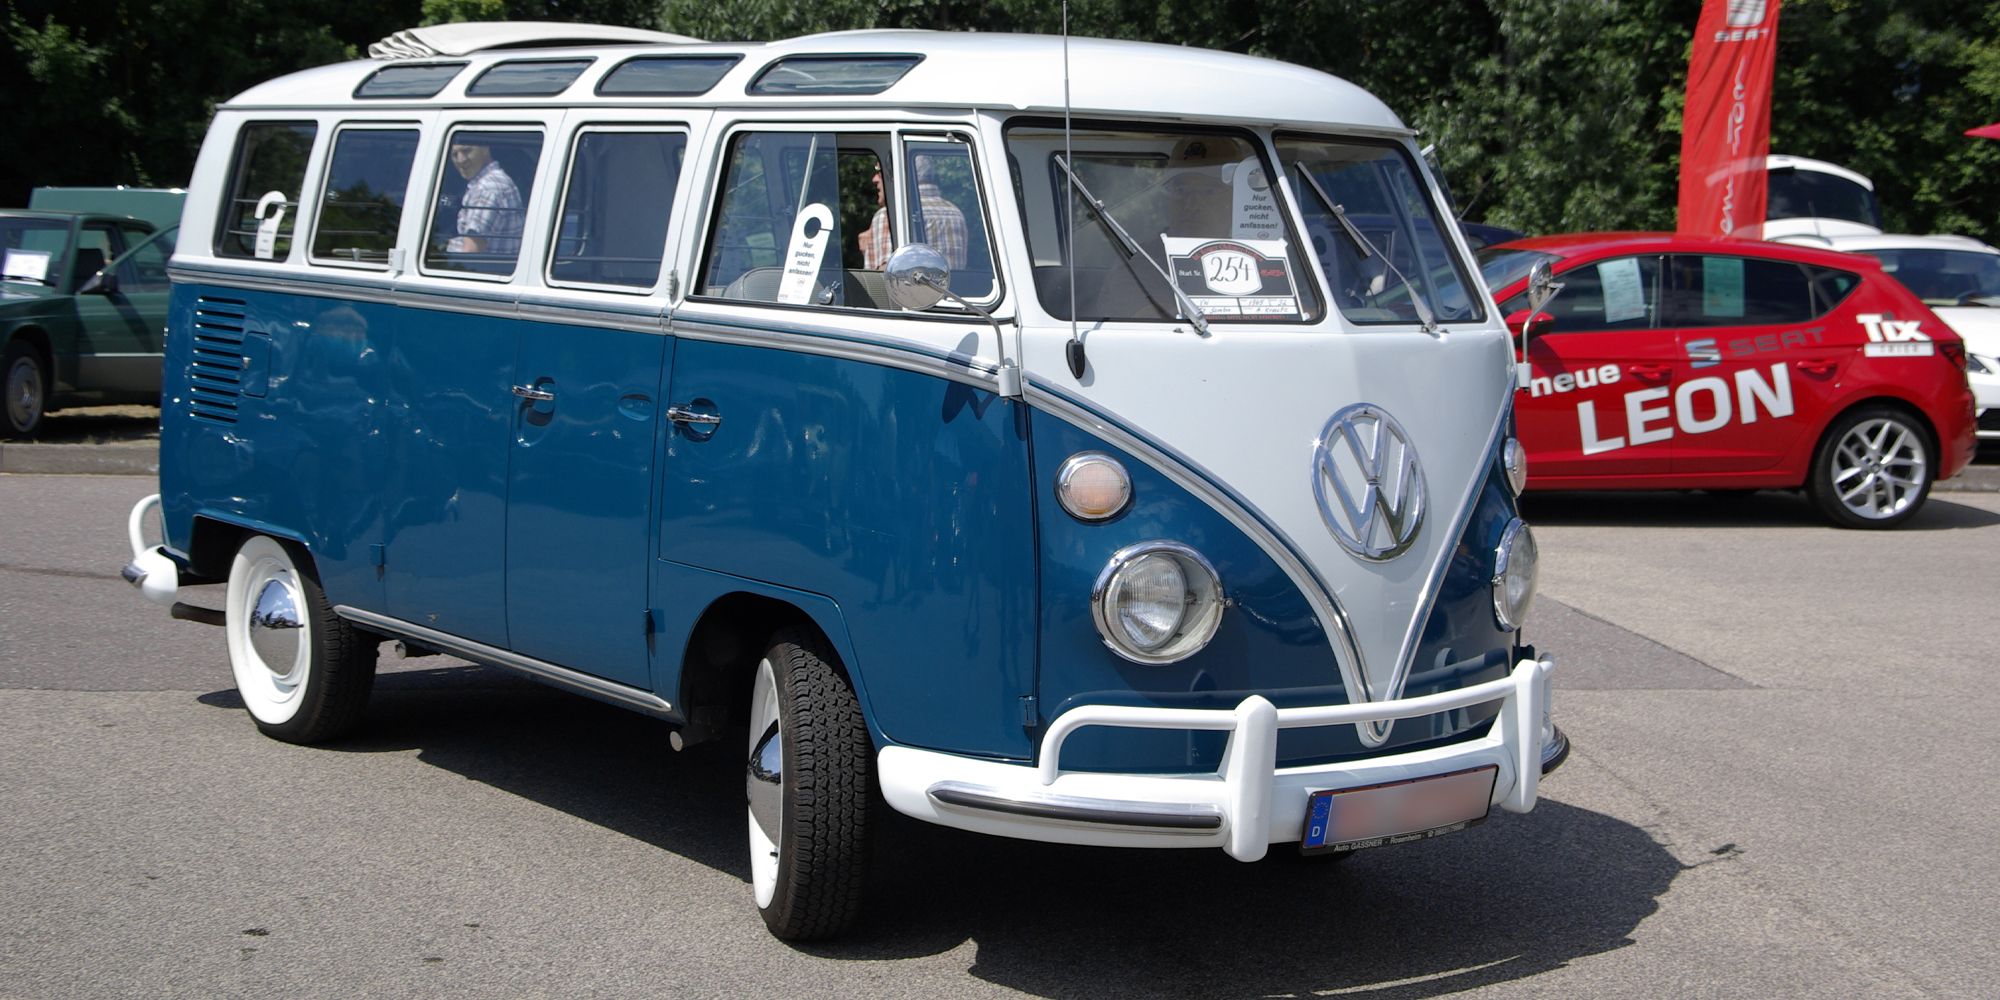 A two tone blue and white Bus